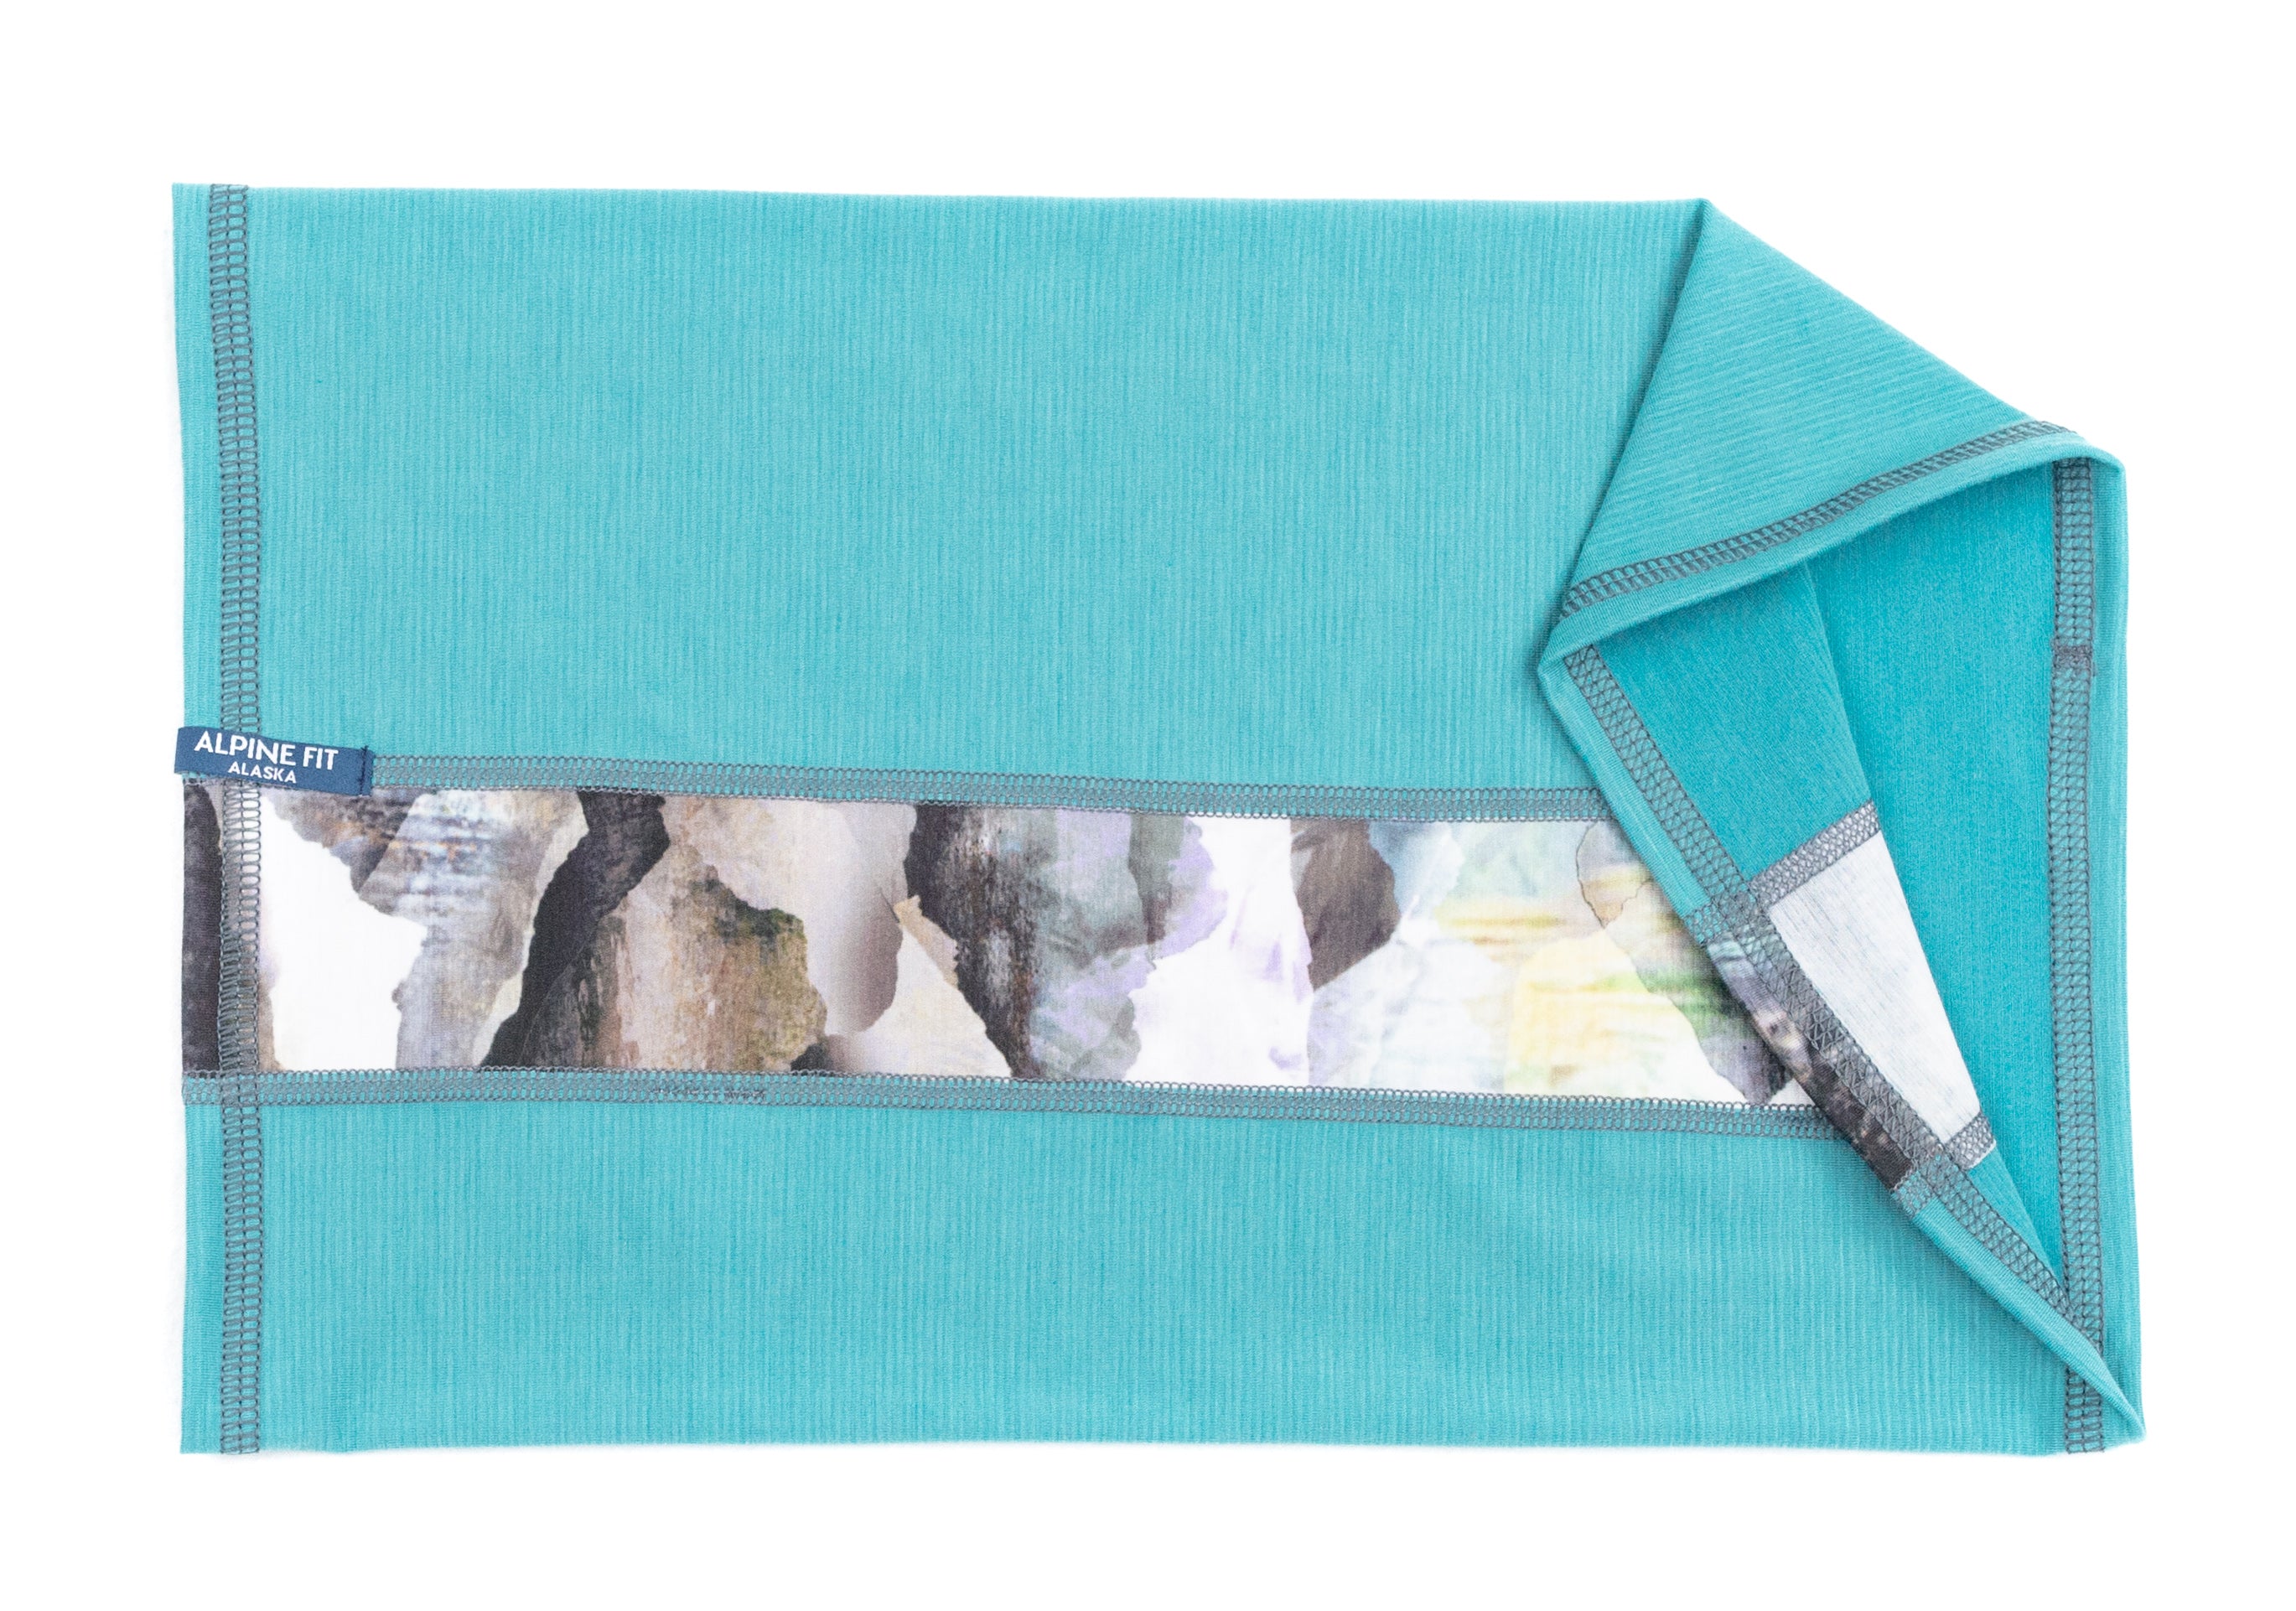 Alpine Fit Neck Gaiter For Hiking Teal Flat Lay Showing Inside